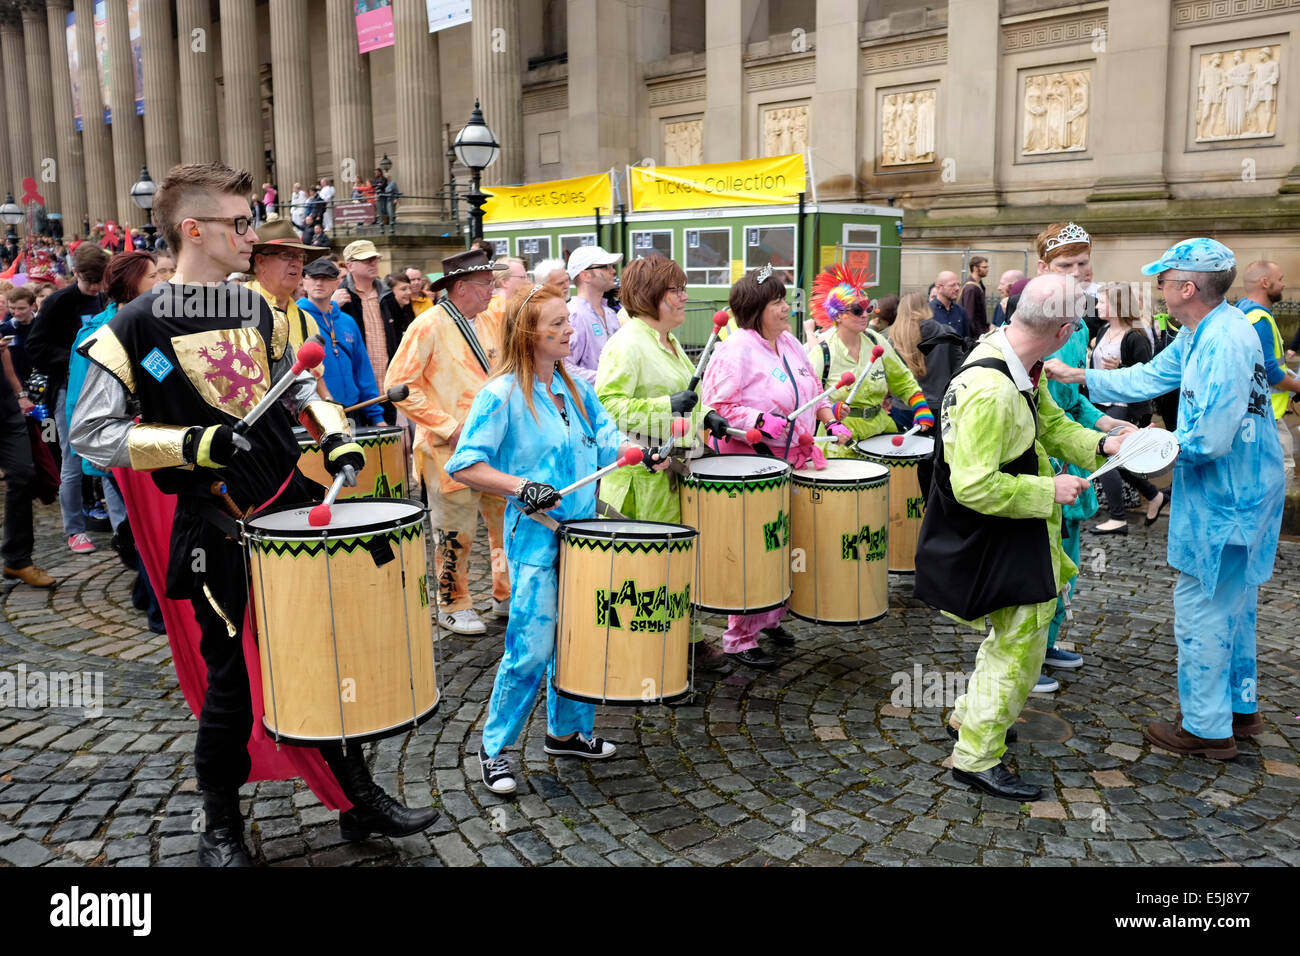 Liverpool, UK. 2nd Aug, 2014.  Liverpool Gay Pride Festival and March takes place today. Stock Photo